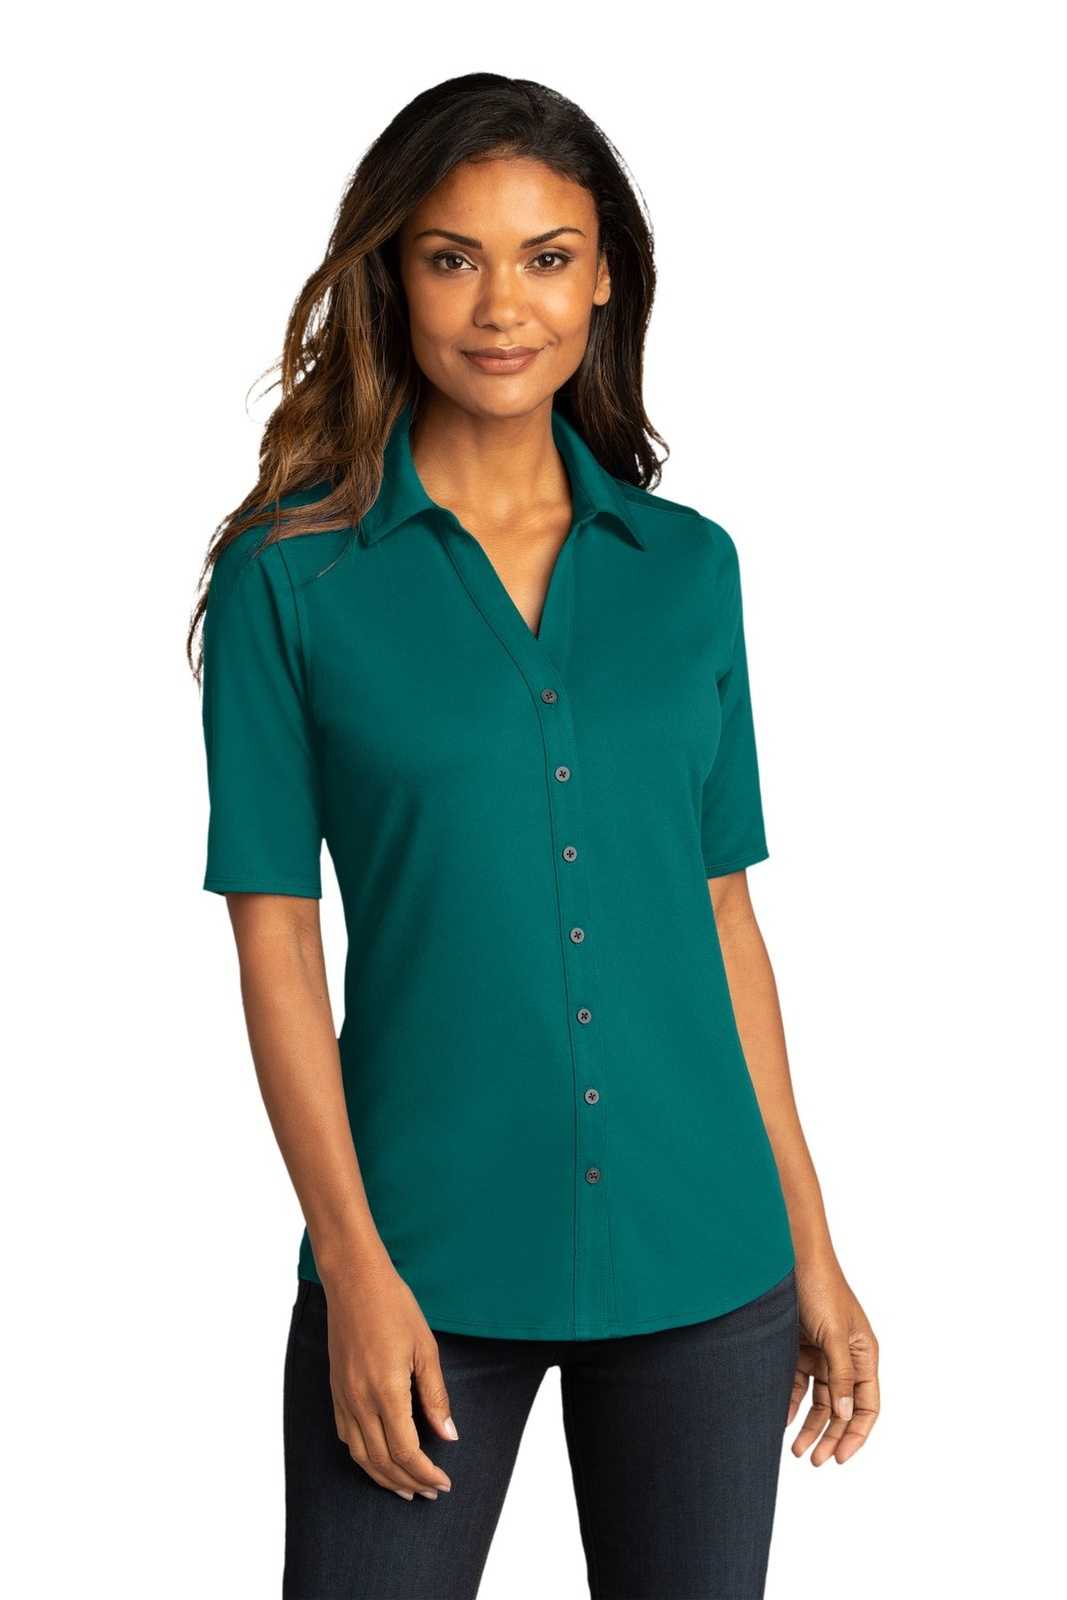 Port Authority LK682 Ladies City Stretch Top - Dark Teal - HIT a Double - 1